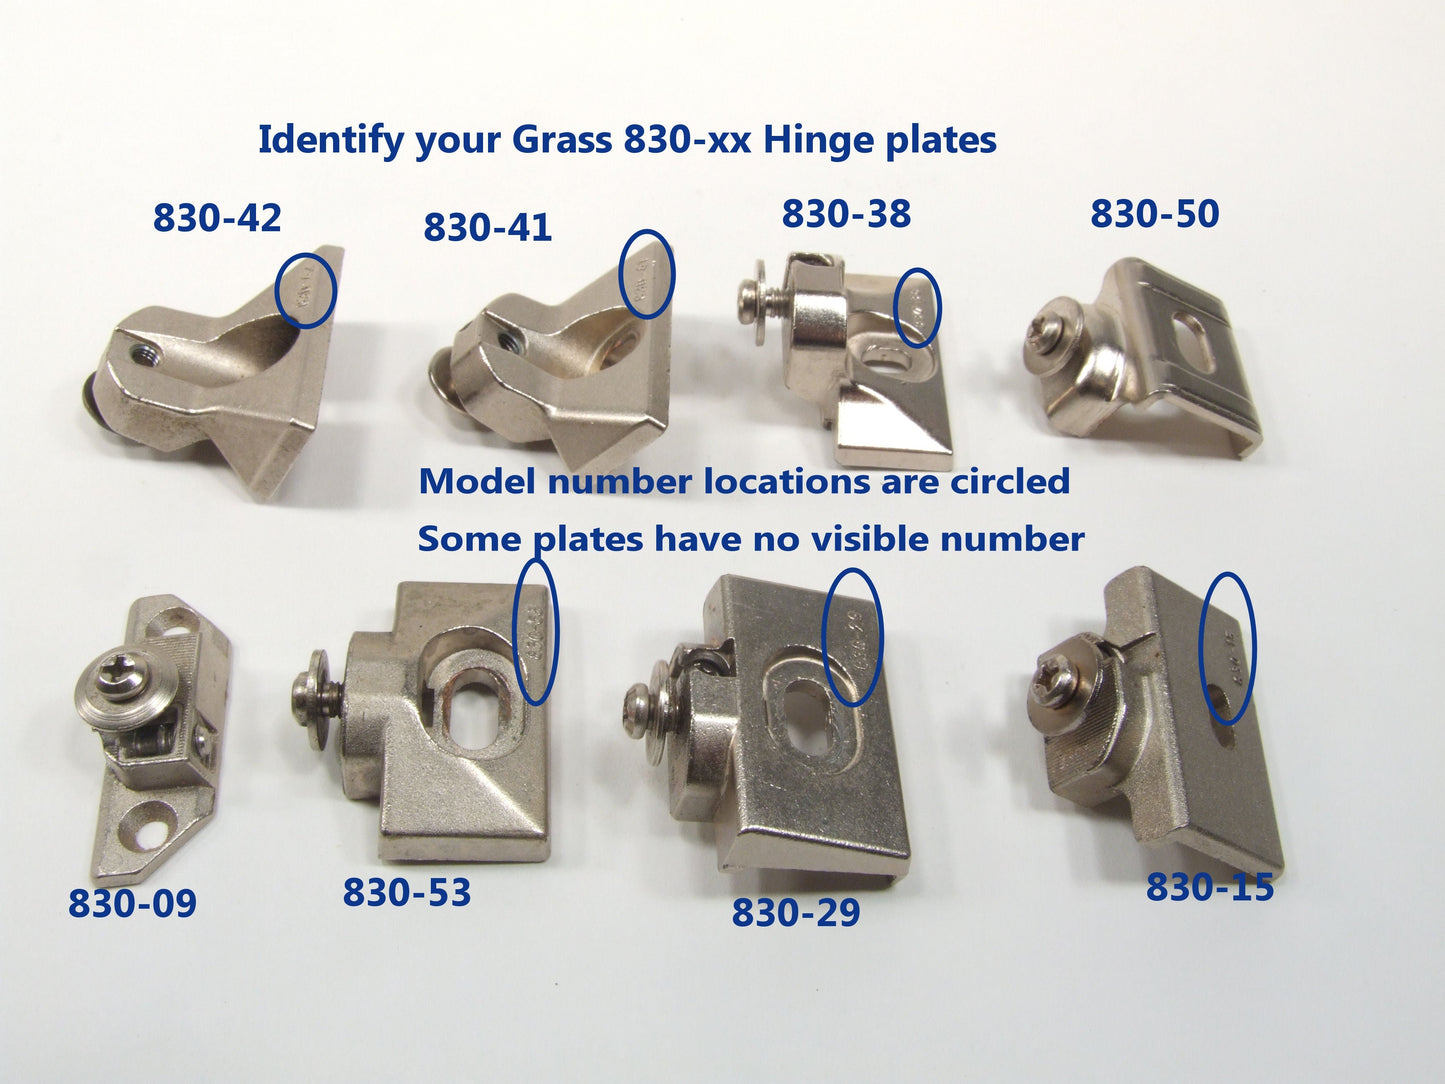 Grass 830-15 Soft Close Replacement Hinges - Sold as PAIRS!